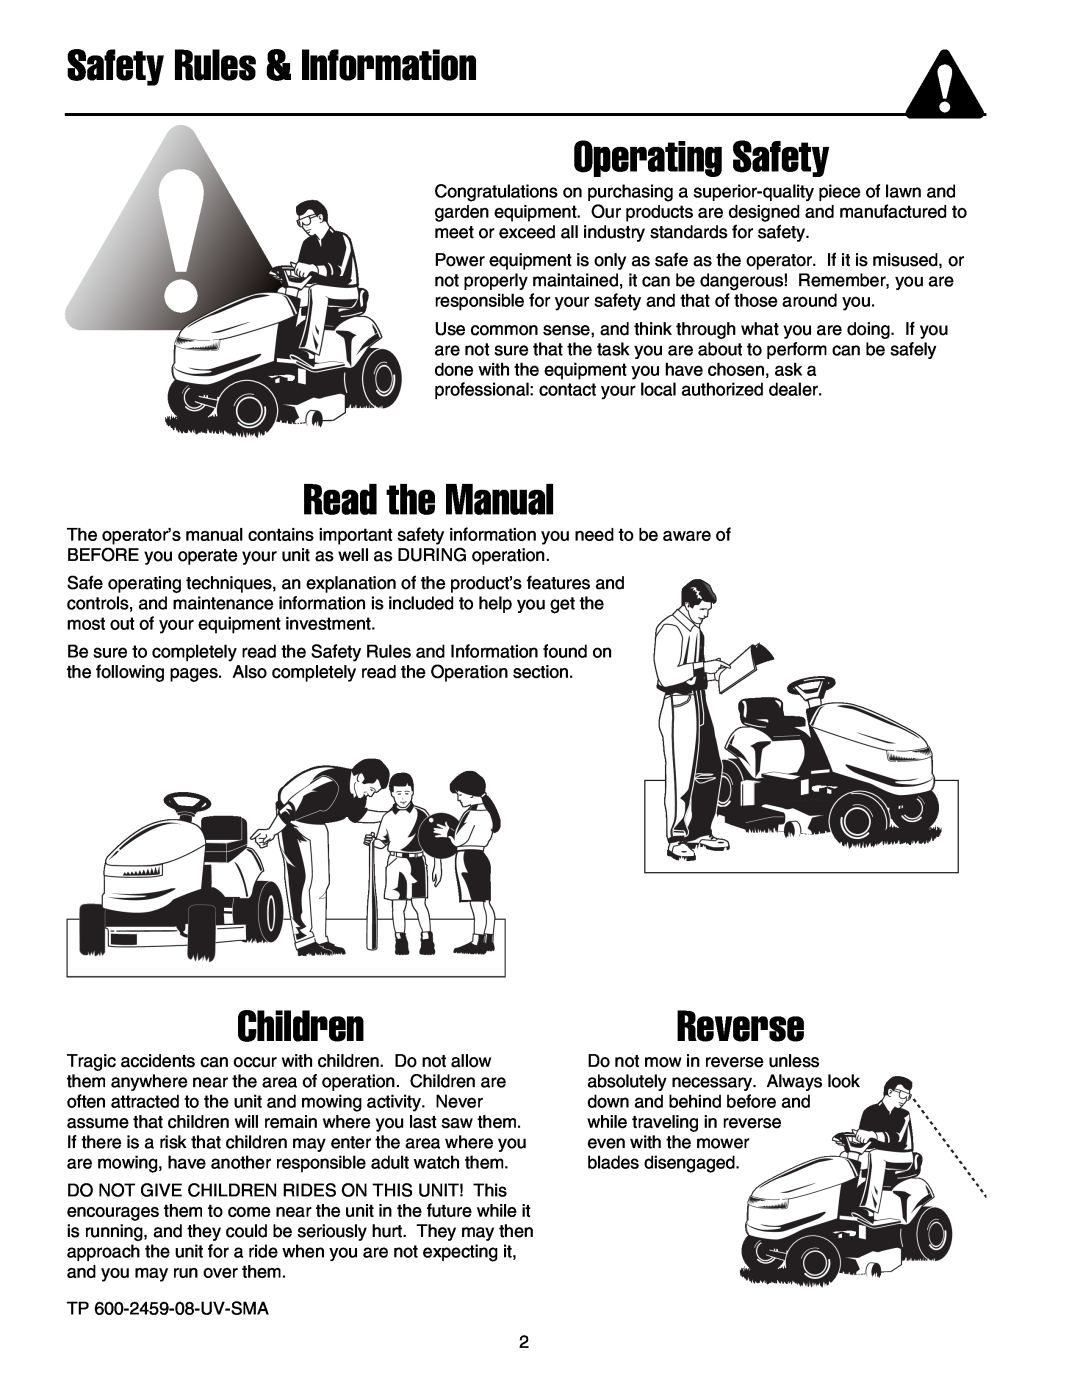 Snapper 1700, 2700, 400 manual Safety Rules & Information Operating Safety, Read the Manual, ChildrenReverse 